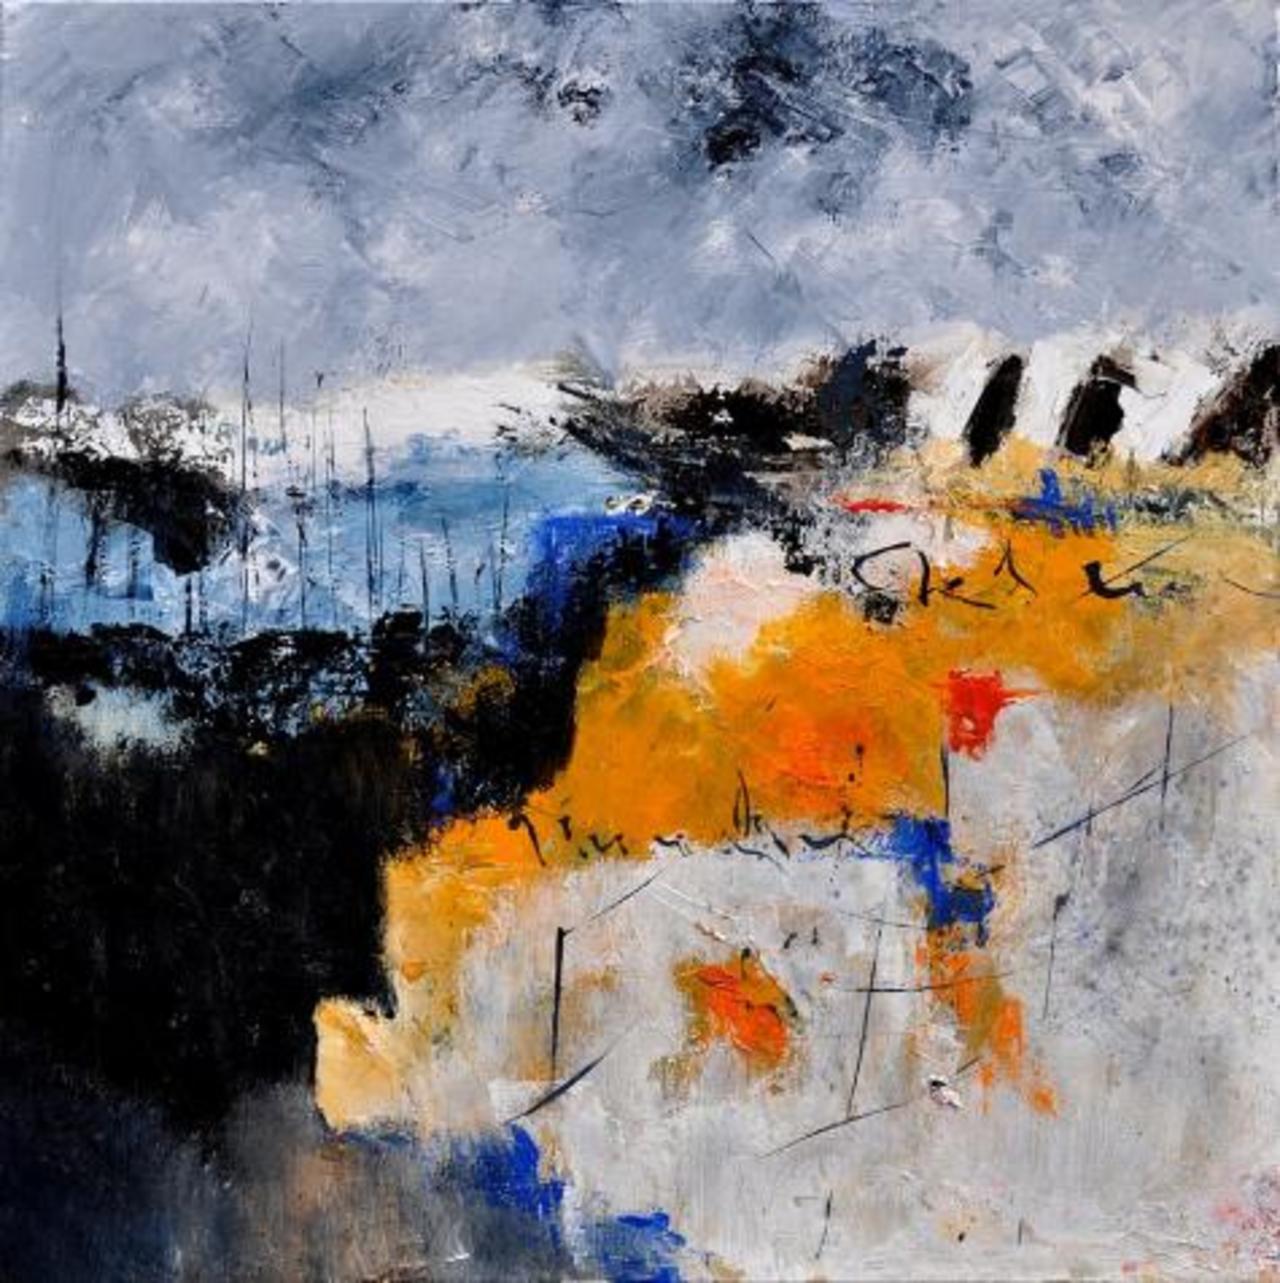 RT @Rem040: abstract landscape #painting by #artist Pol Ledent http://t.co/xRd2XWFuS1